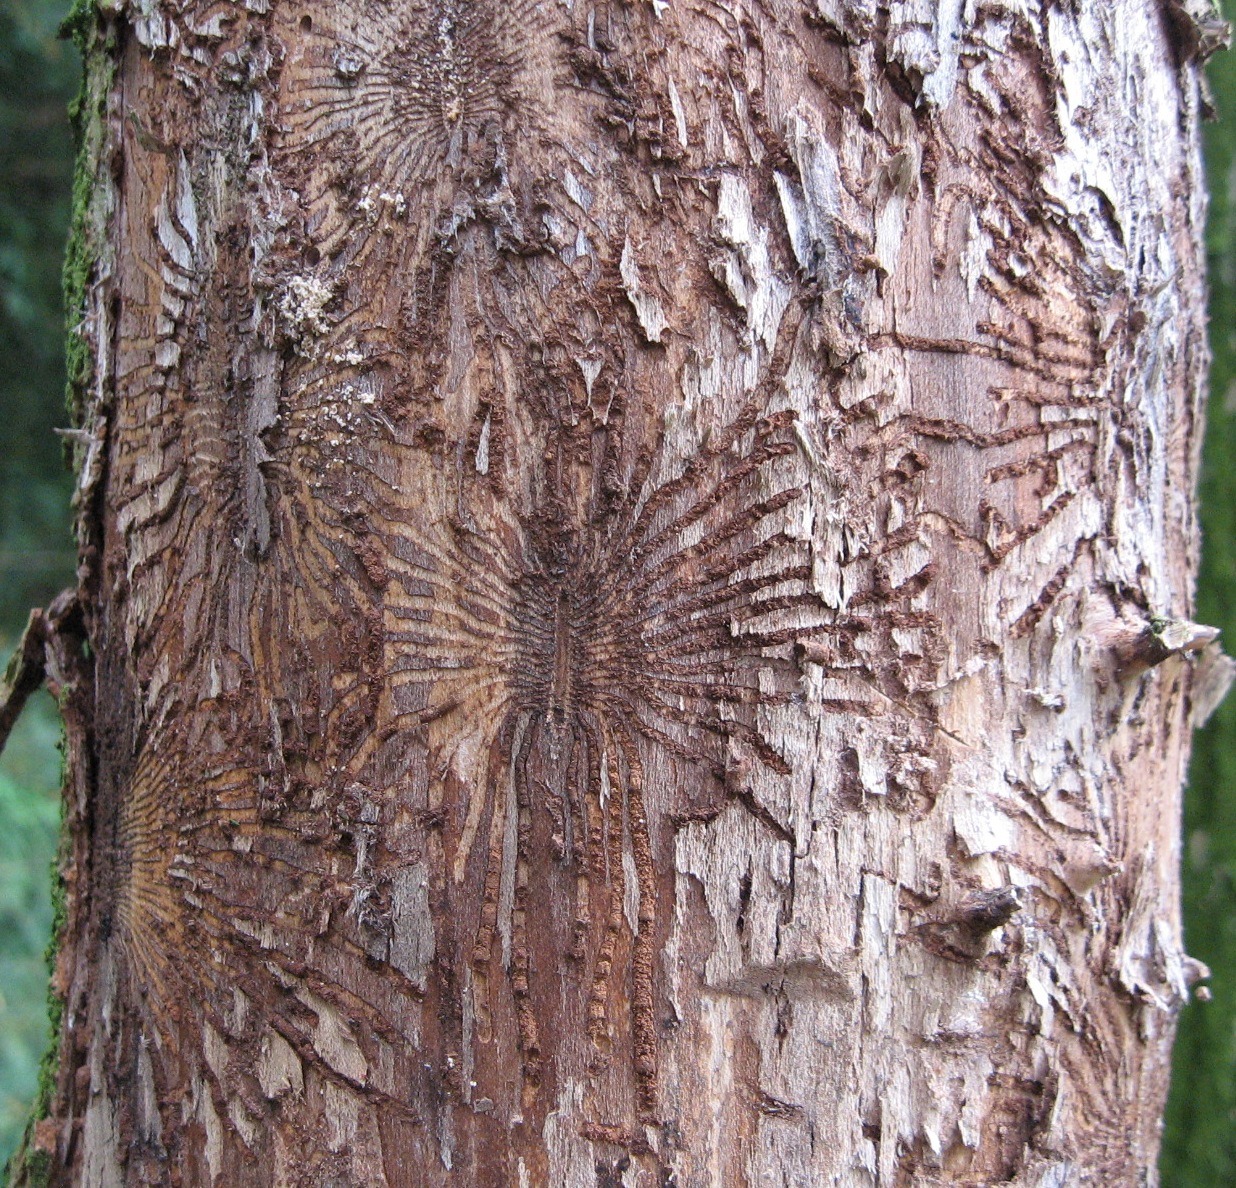 A Wych elm with starburst shapes eaten into its bark - the work of beetles.